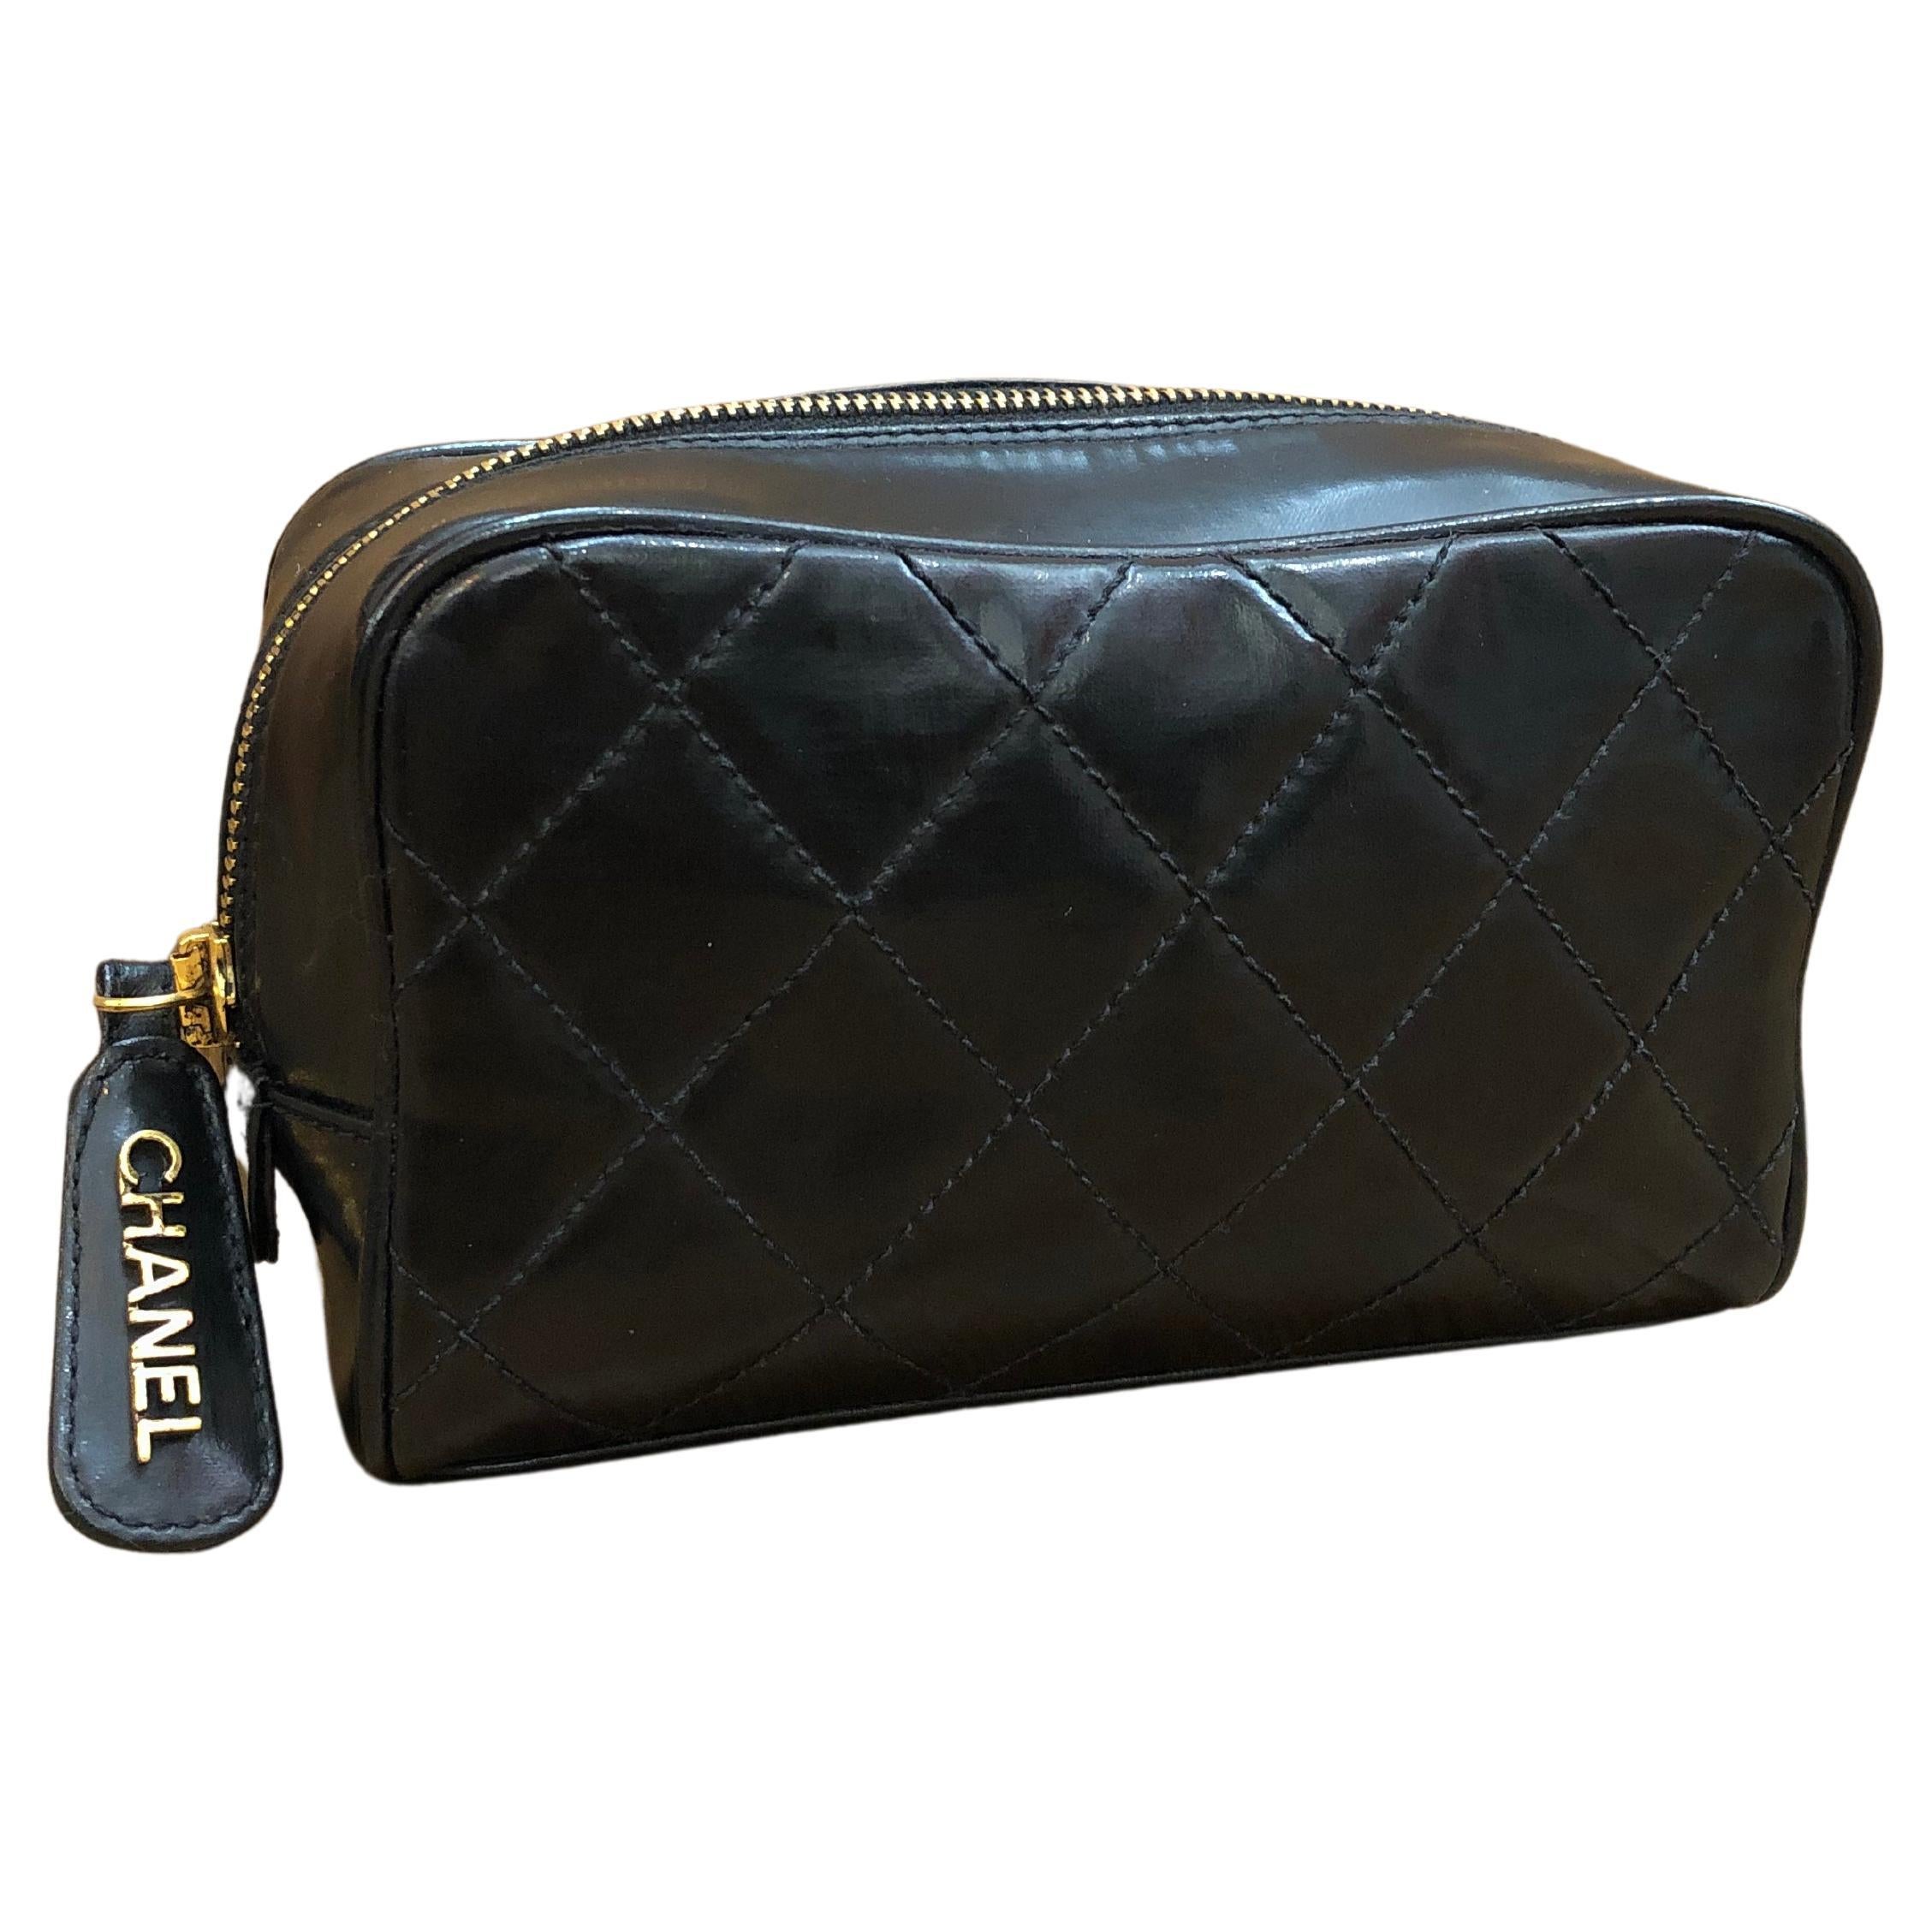 Major Discounts for Genuine Leather Products, Quilted Leather Purses, Women Shoulder Bags, Flap Bags, Classic Crossbody Bags, Made in Greece